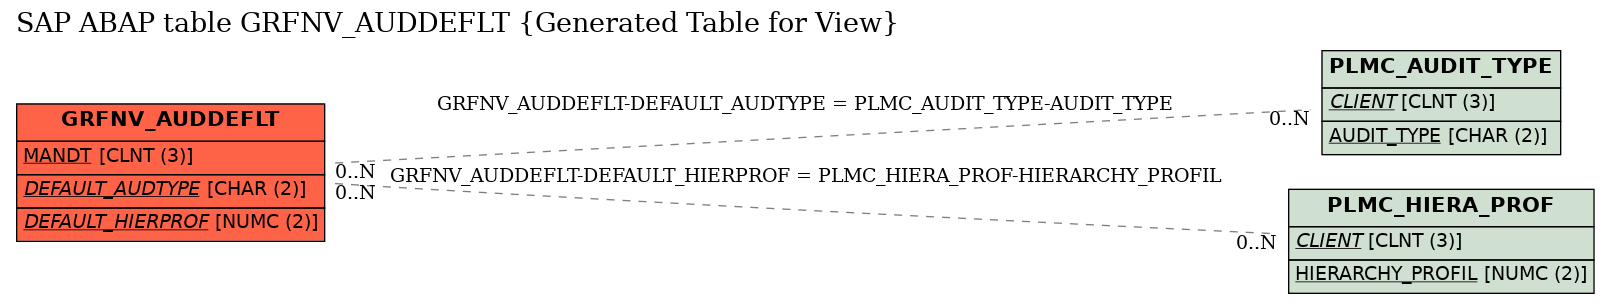 E-R Diagram for table GRFNV_AUDDEFLT (Generated Table for View)